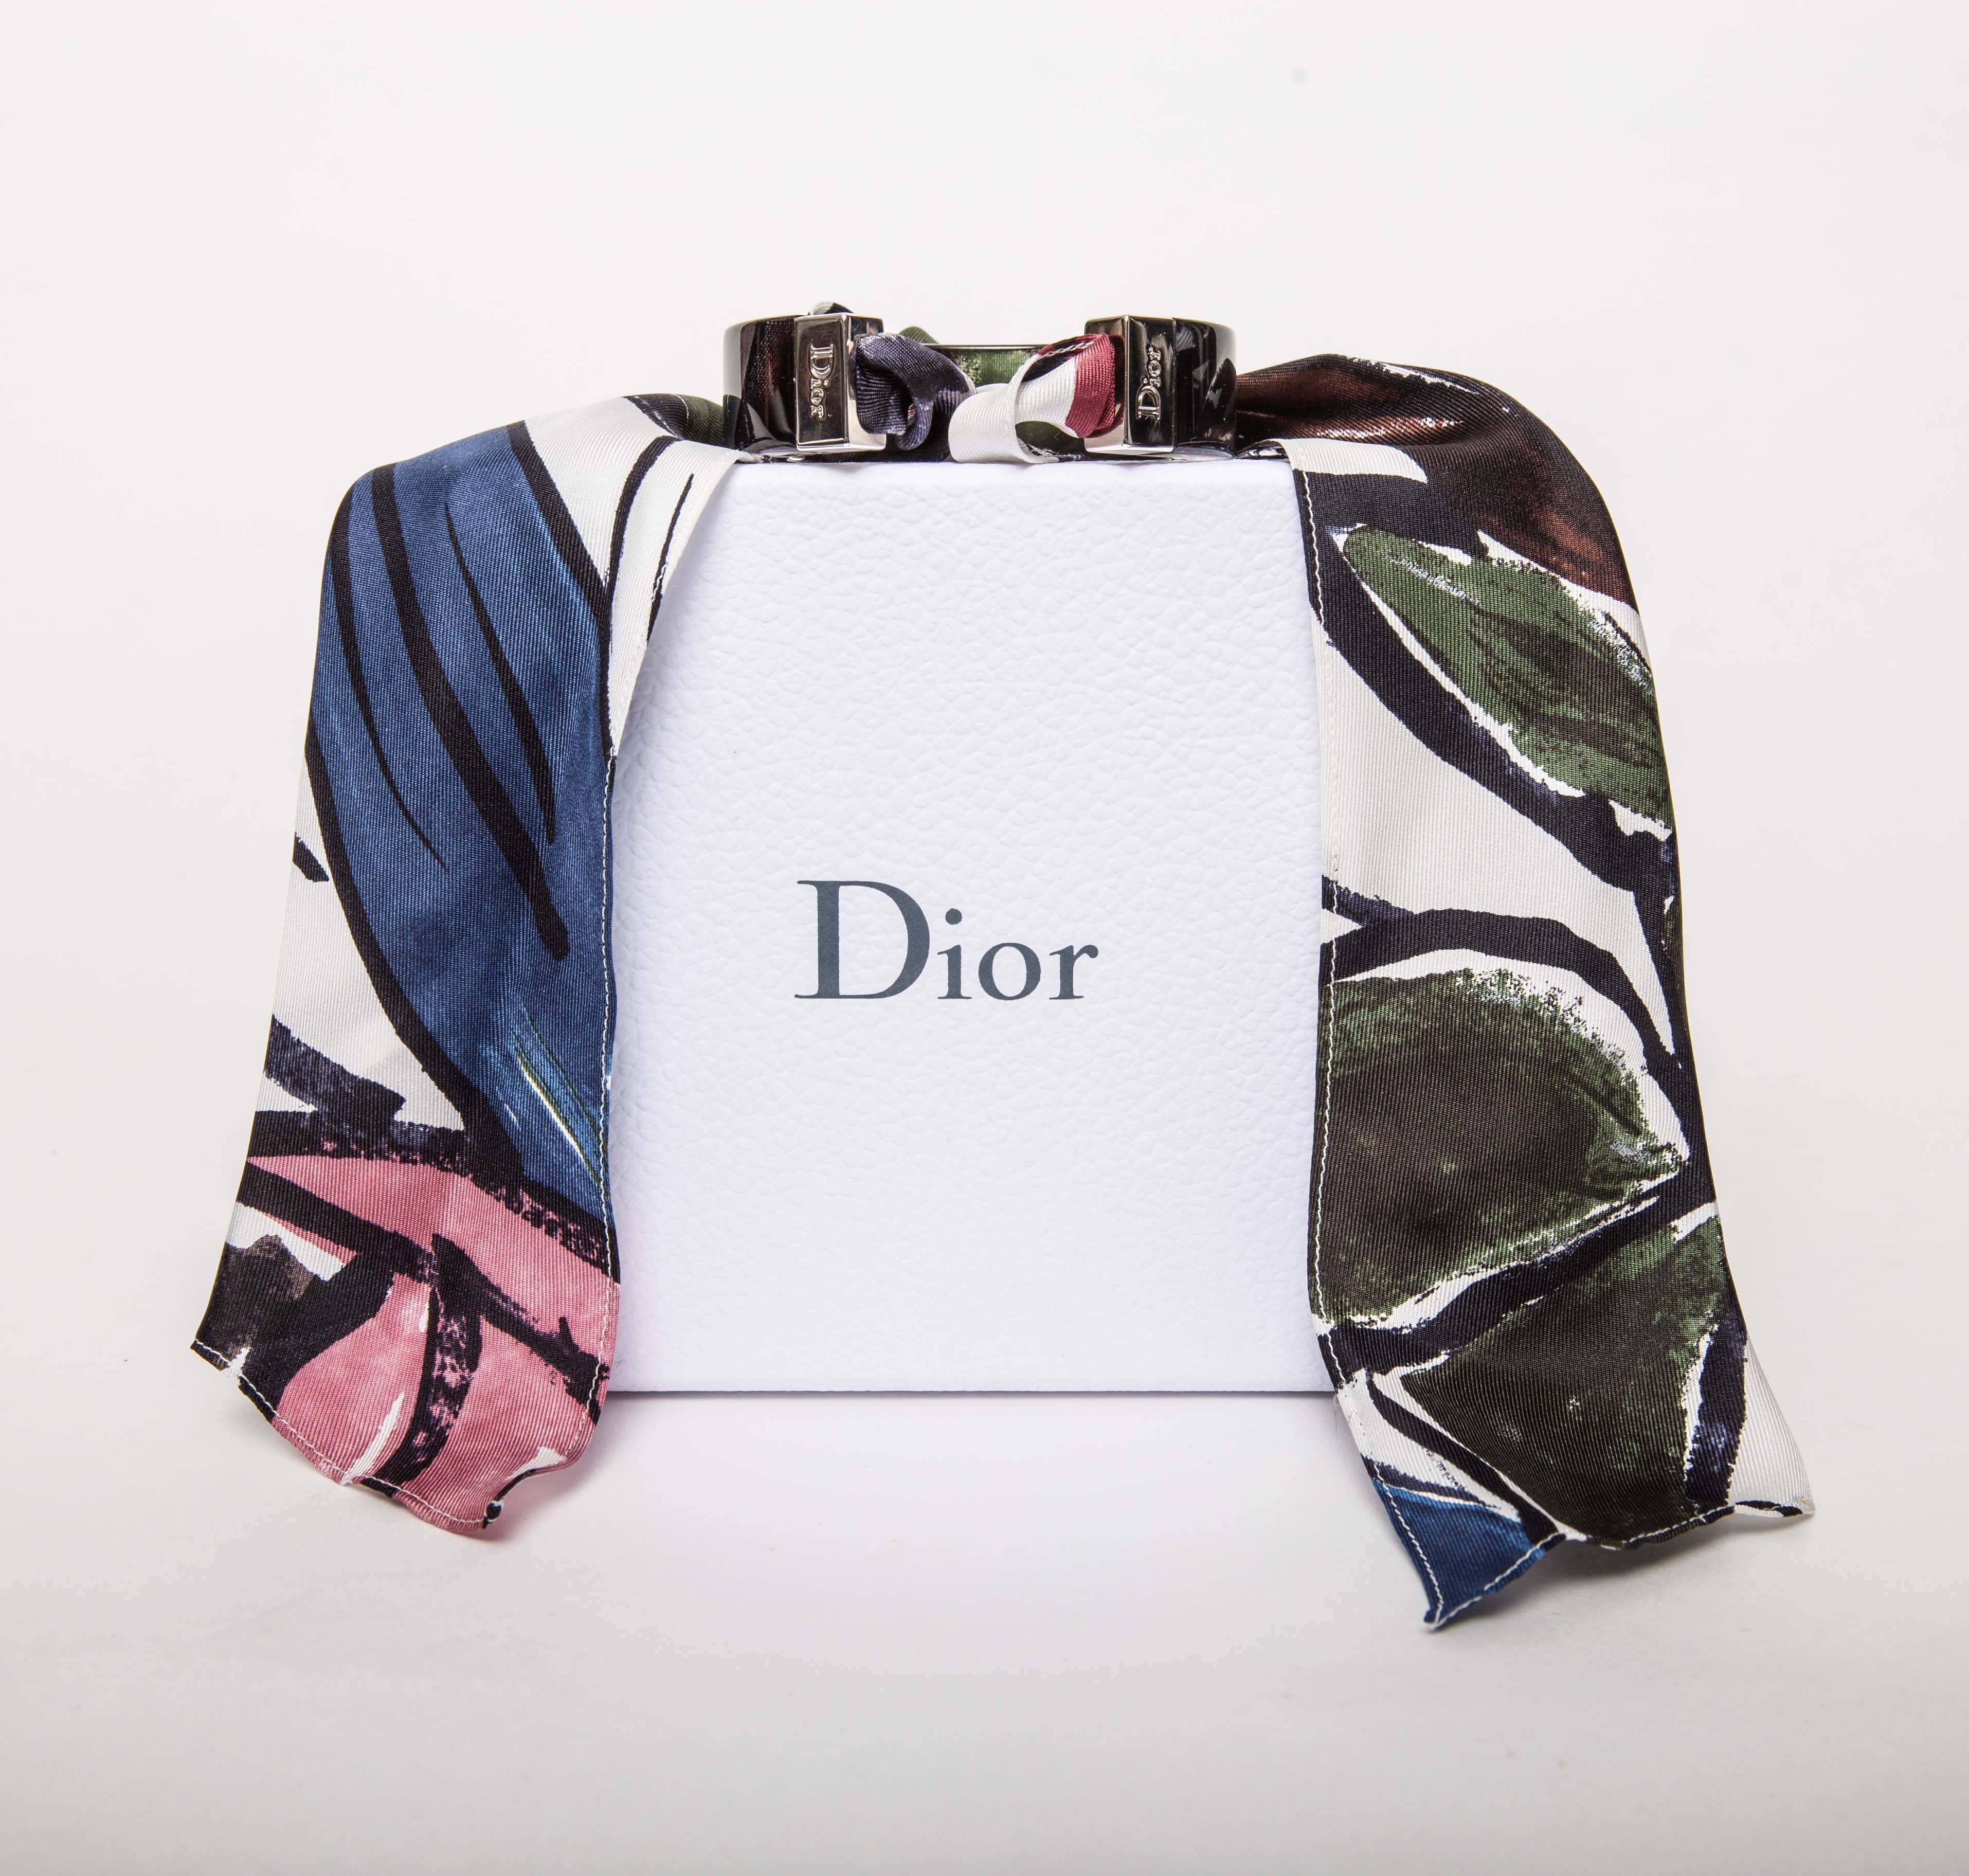 Christian Dior Scarf Bracelet featuring green, blue, pink, and neutral toned silk scarf attached to chunky Lucite cuff. 2015 Cruise Collection.
Comes with original box.